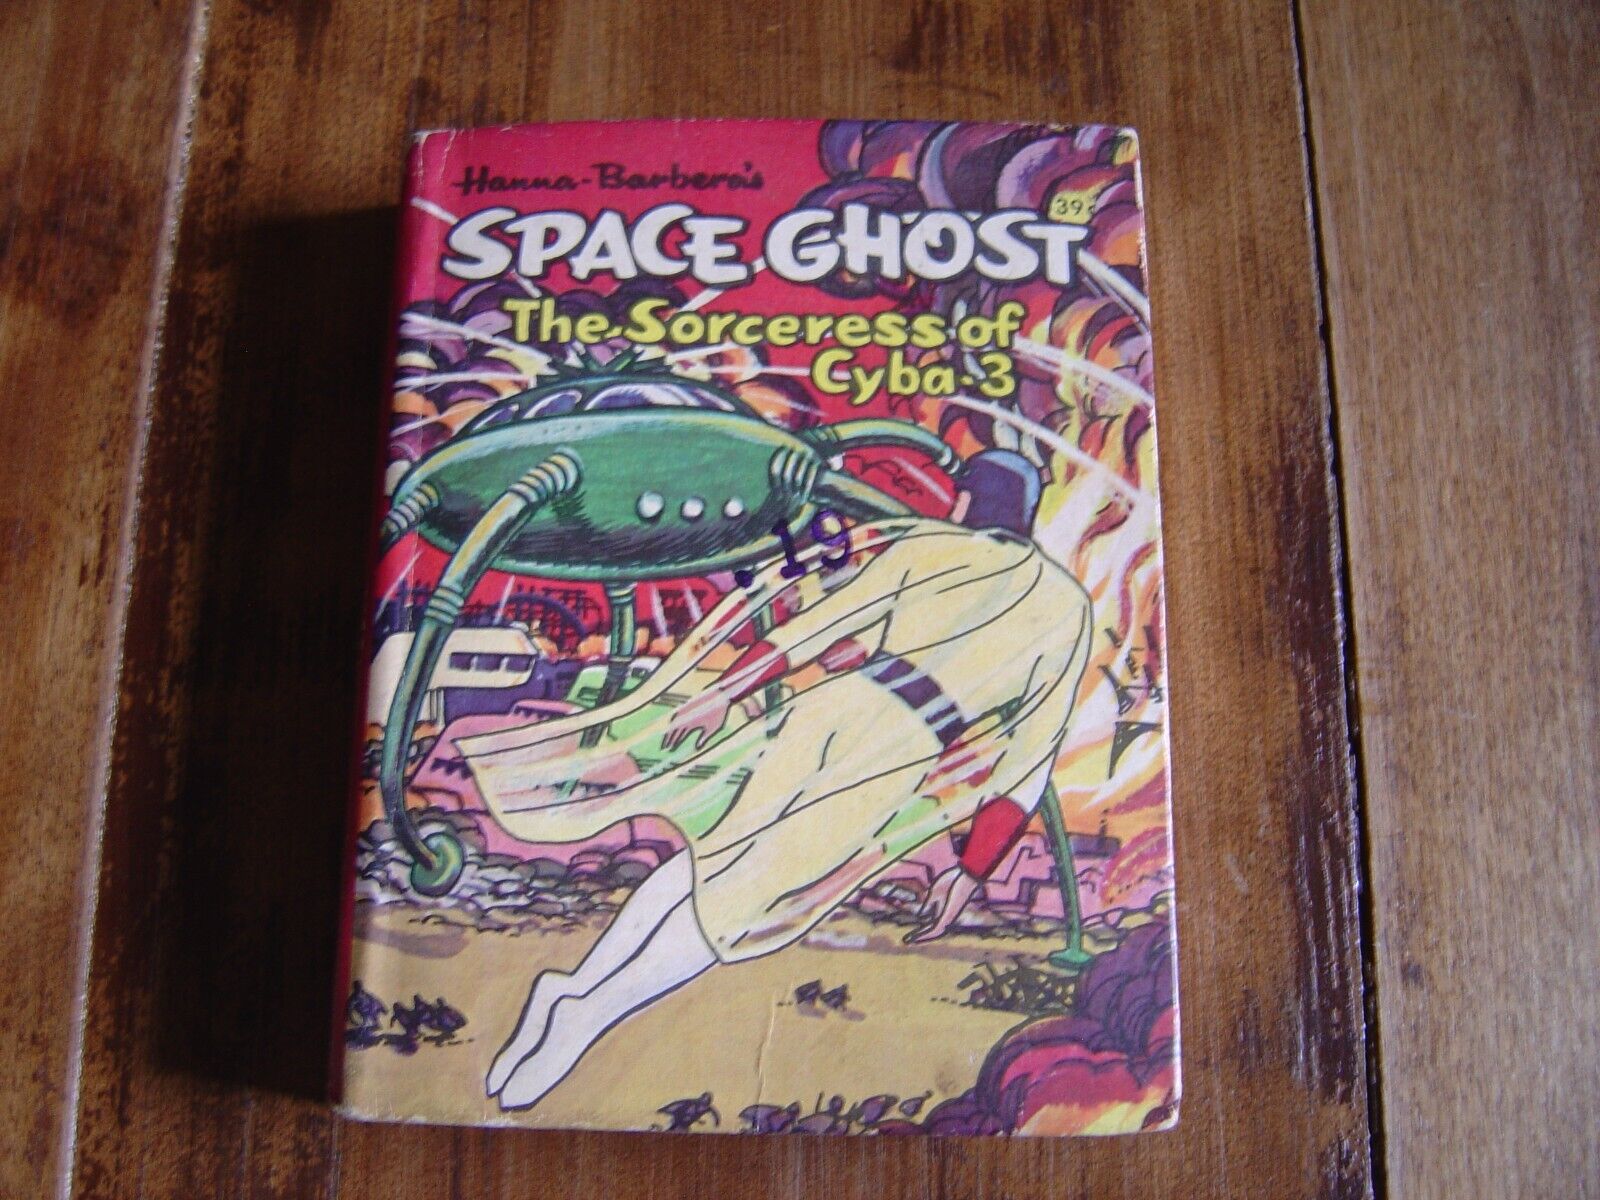 Vintage Big Little Book 1968 Hardcover Space Ghost The Sorceress of Cyba-3  EXC